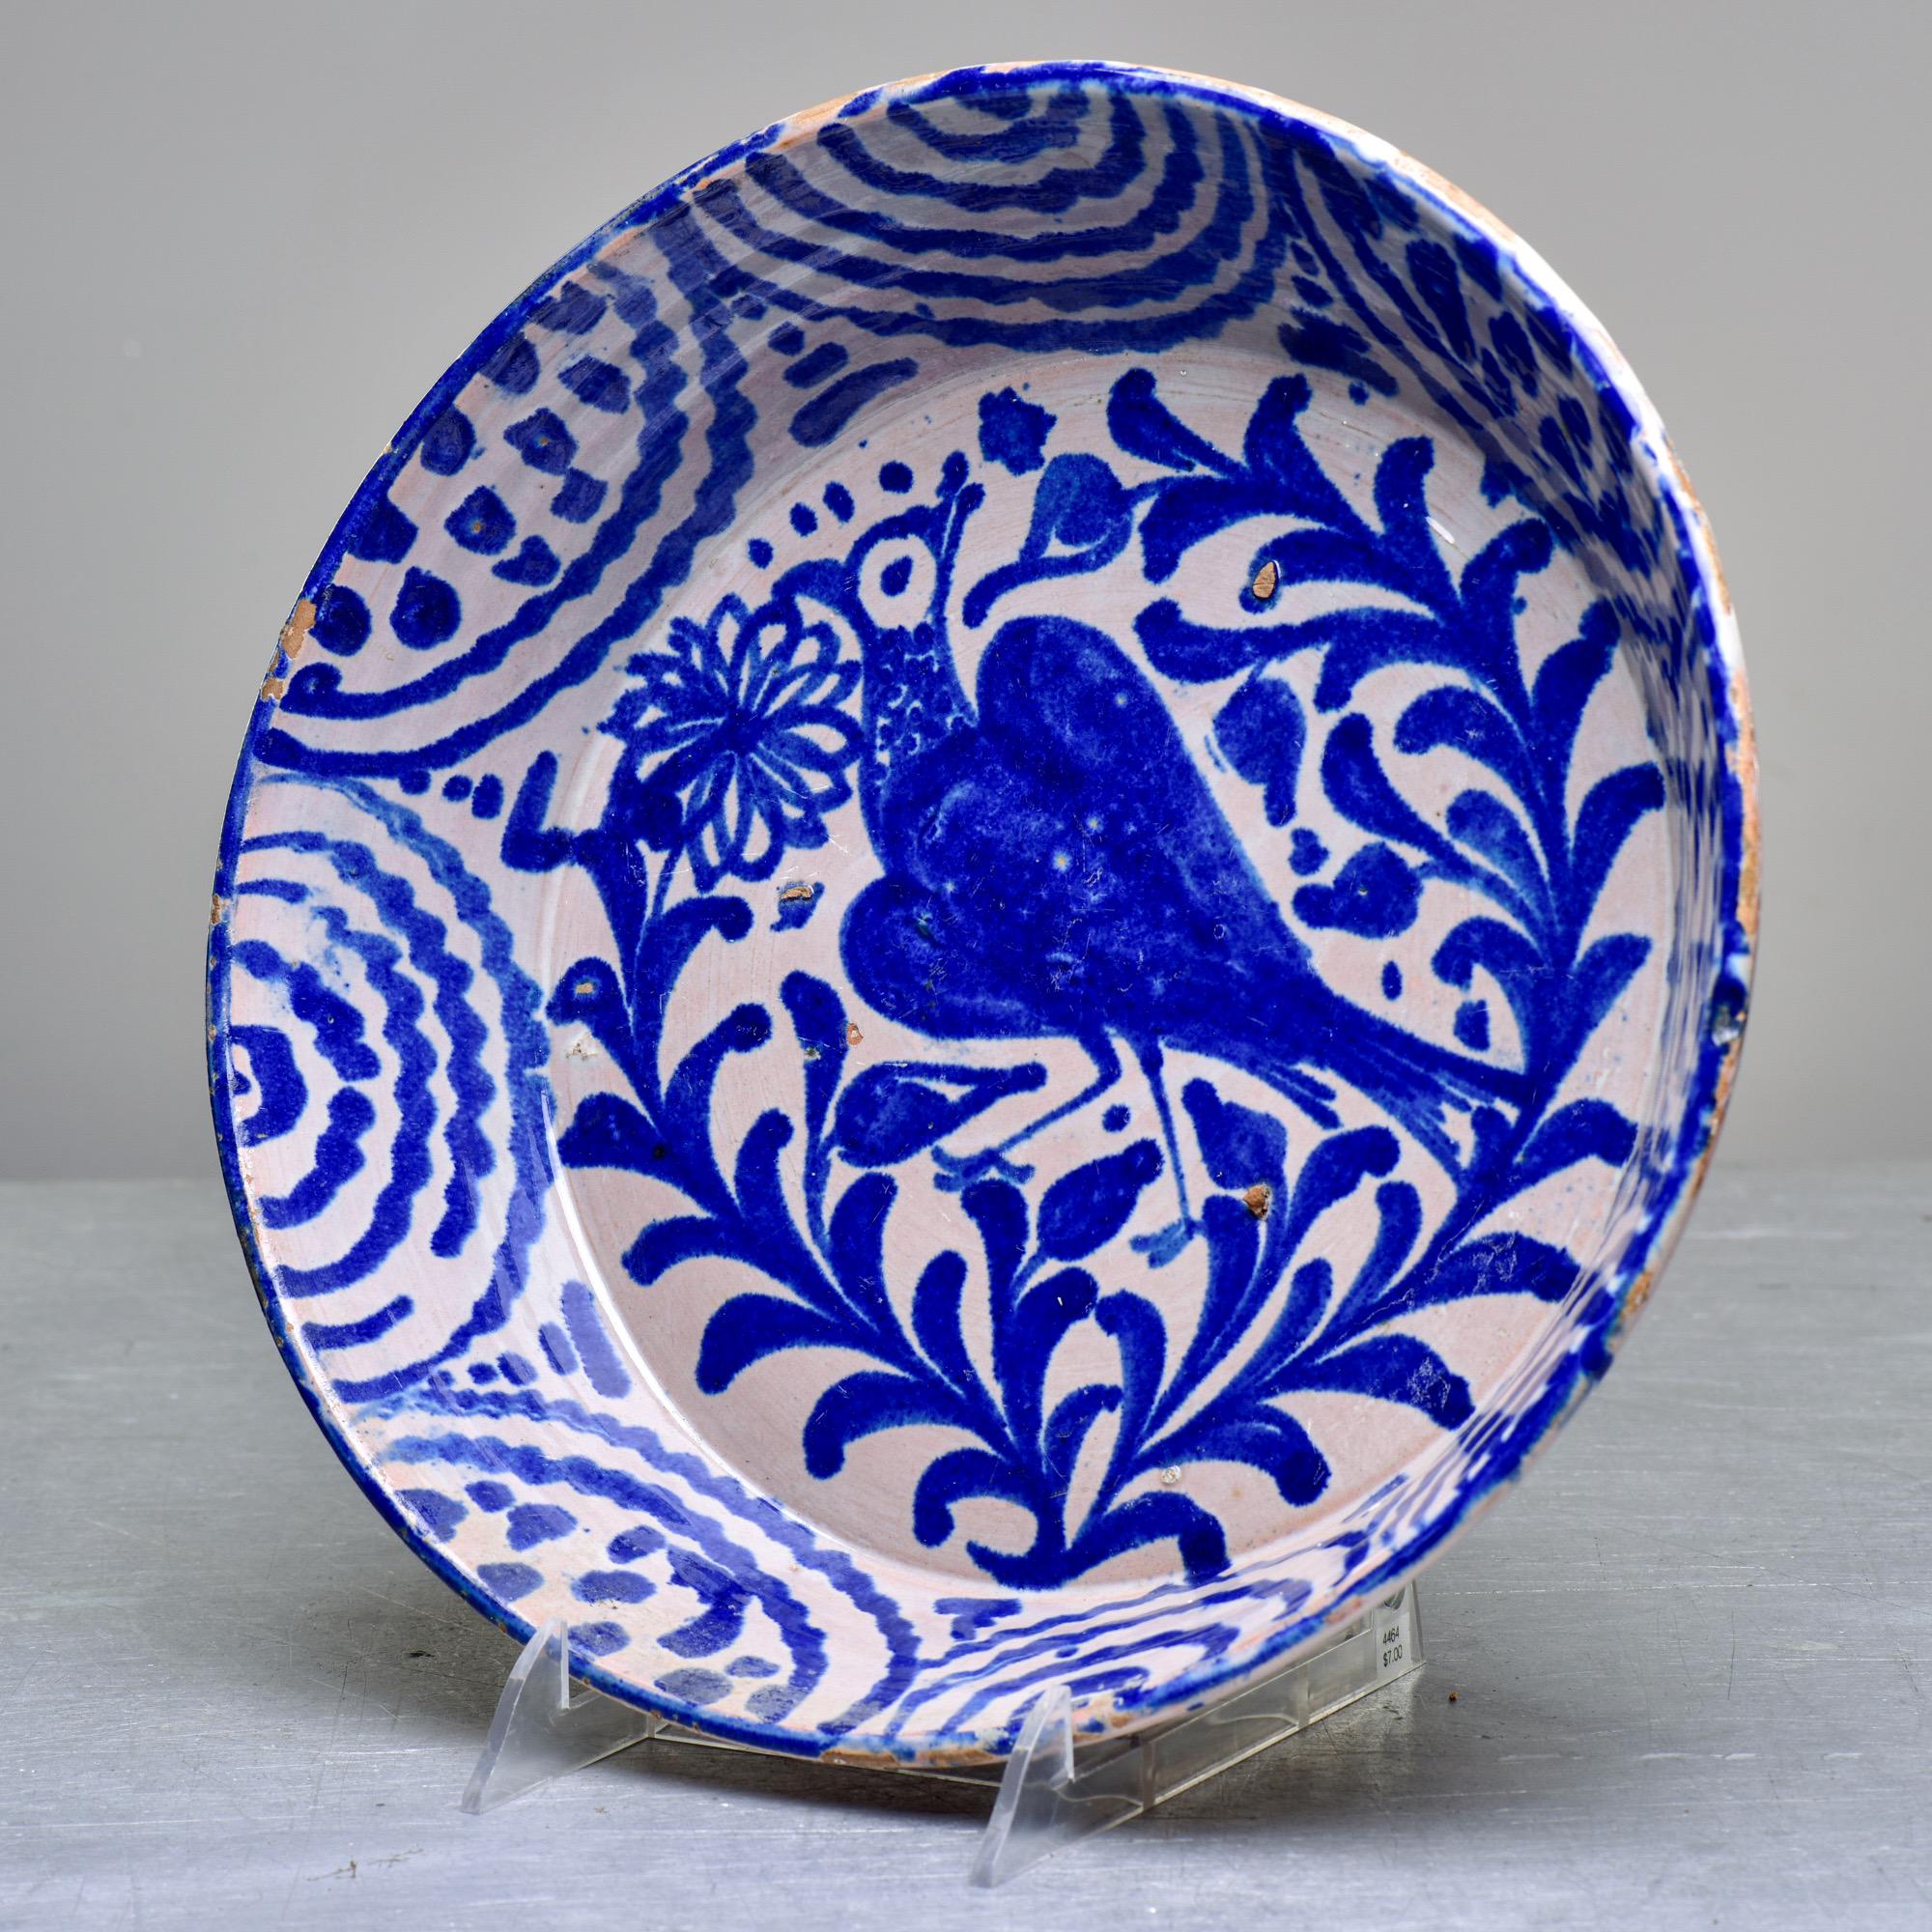 Circa 1890s Spanish Fajalauza terra cotta bowl in traditional blue and white glaze with bird at the center and scalloped design at the border. Fajalauza pottery is from Granada, Spain and originated during the 13-15th centuries when the Nasrid